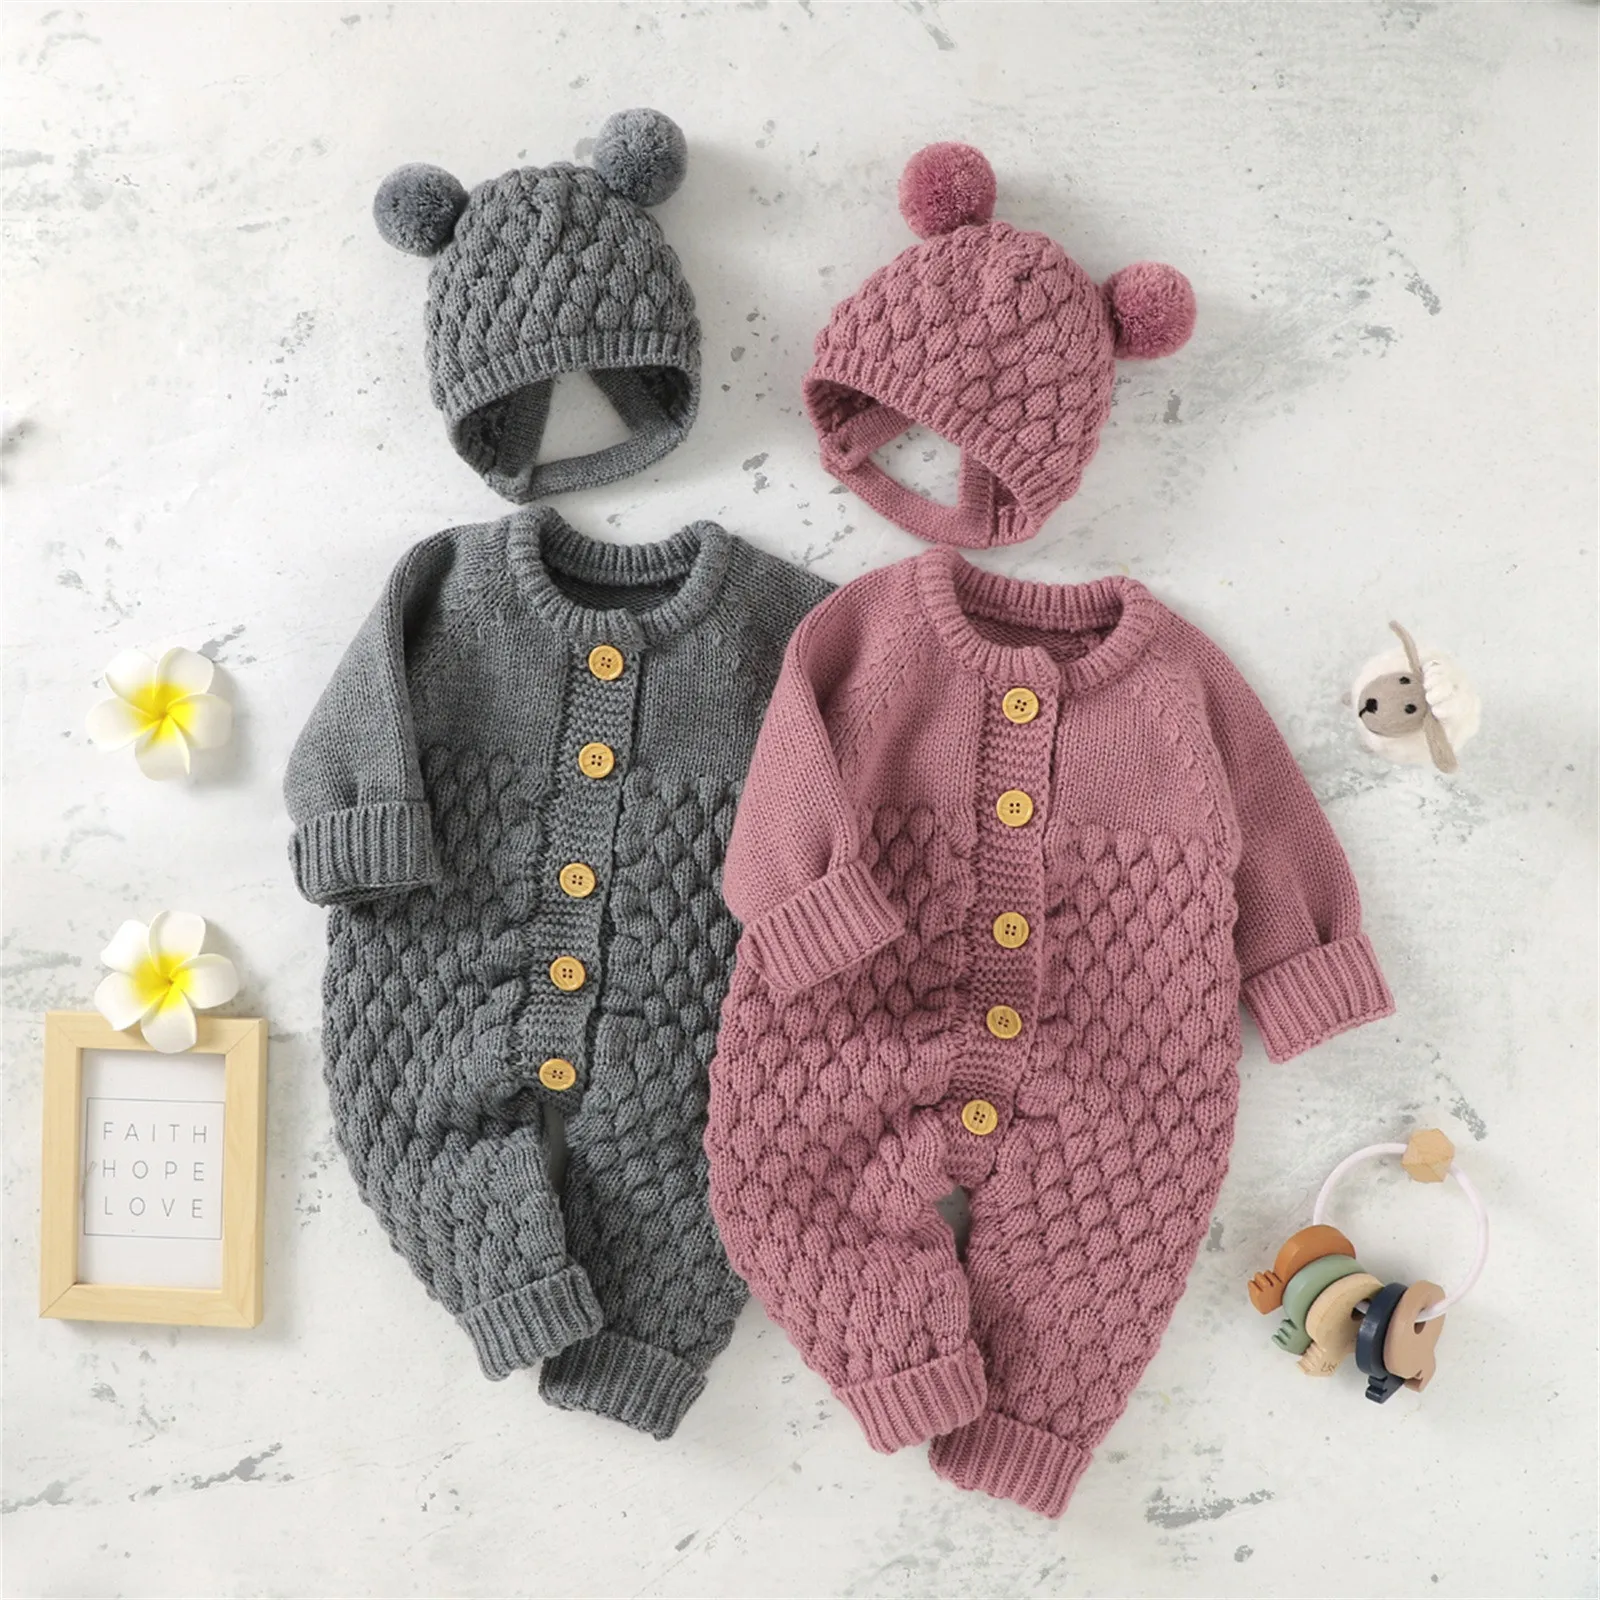 North edge Newborn Baby Knitted Cotton Romper Jumpsuit Outfits Bodysuit with hat Set 